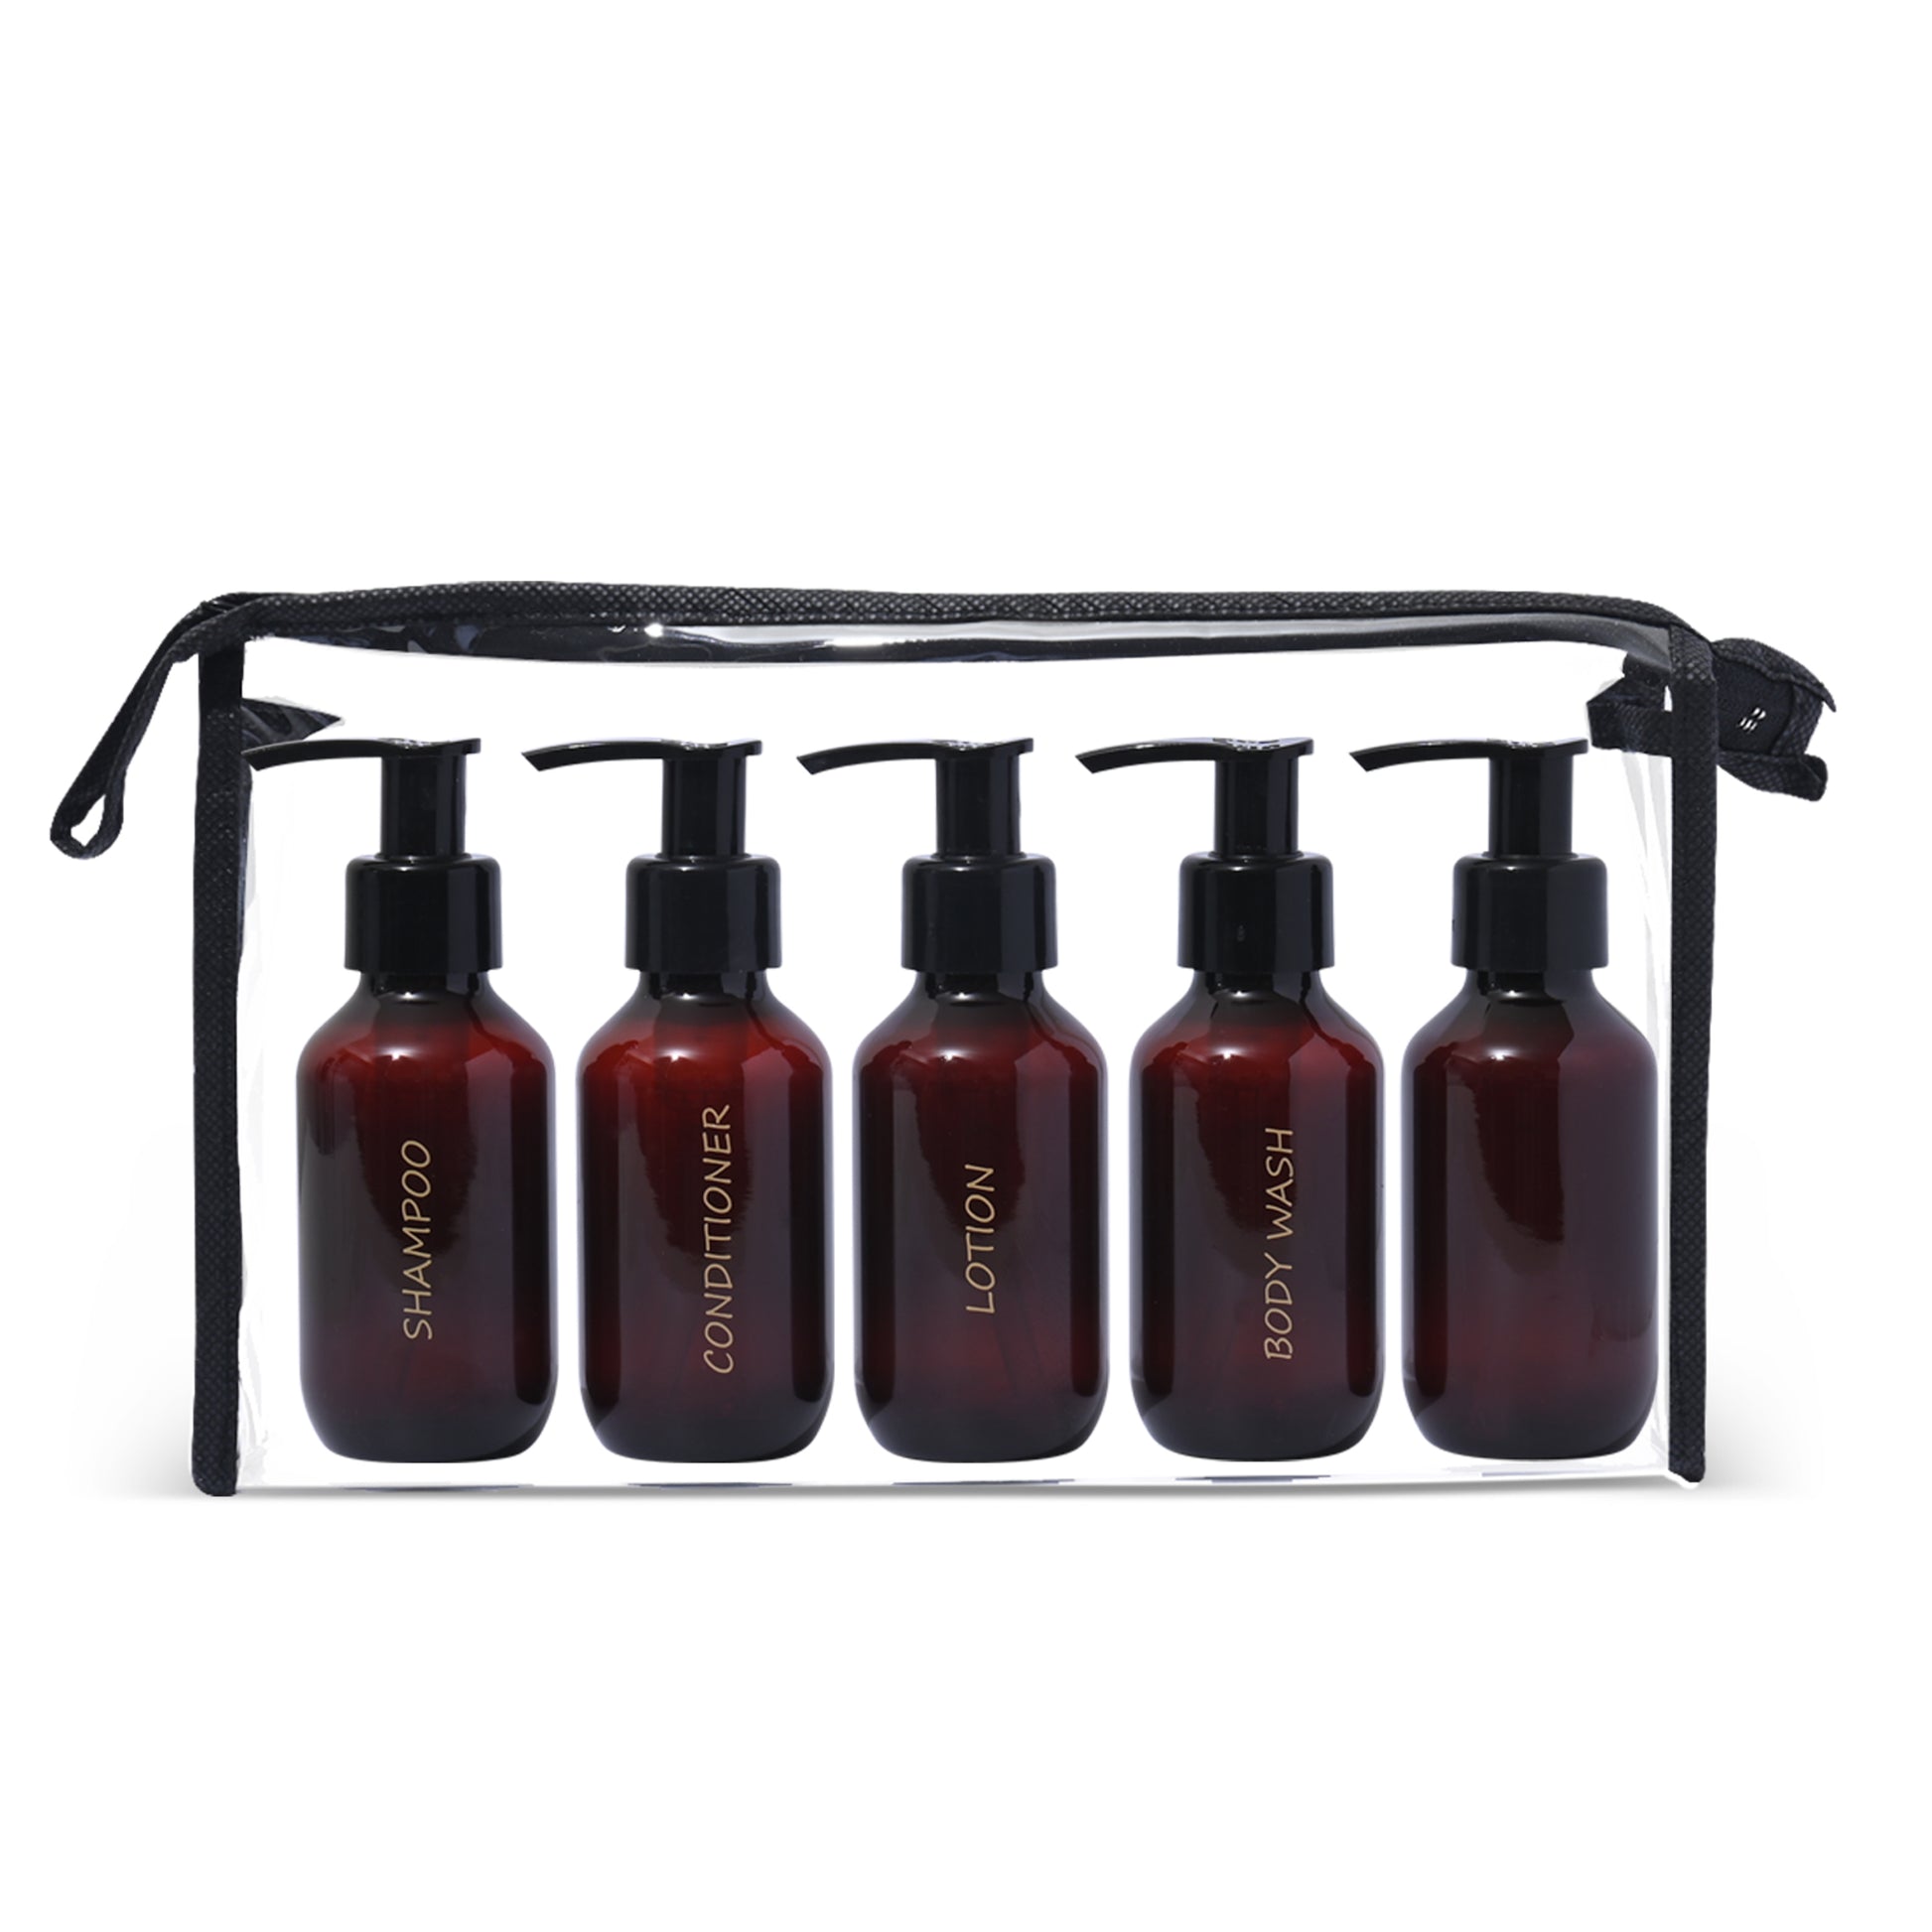 This Amber Soap Bottle Set Is Just $22 at